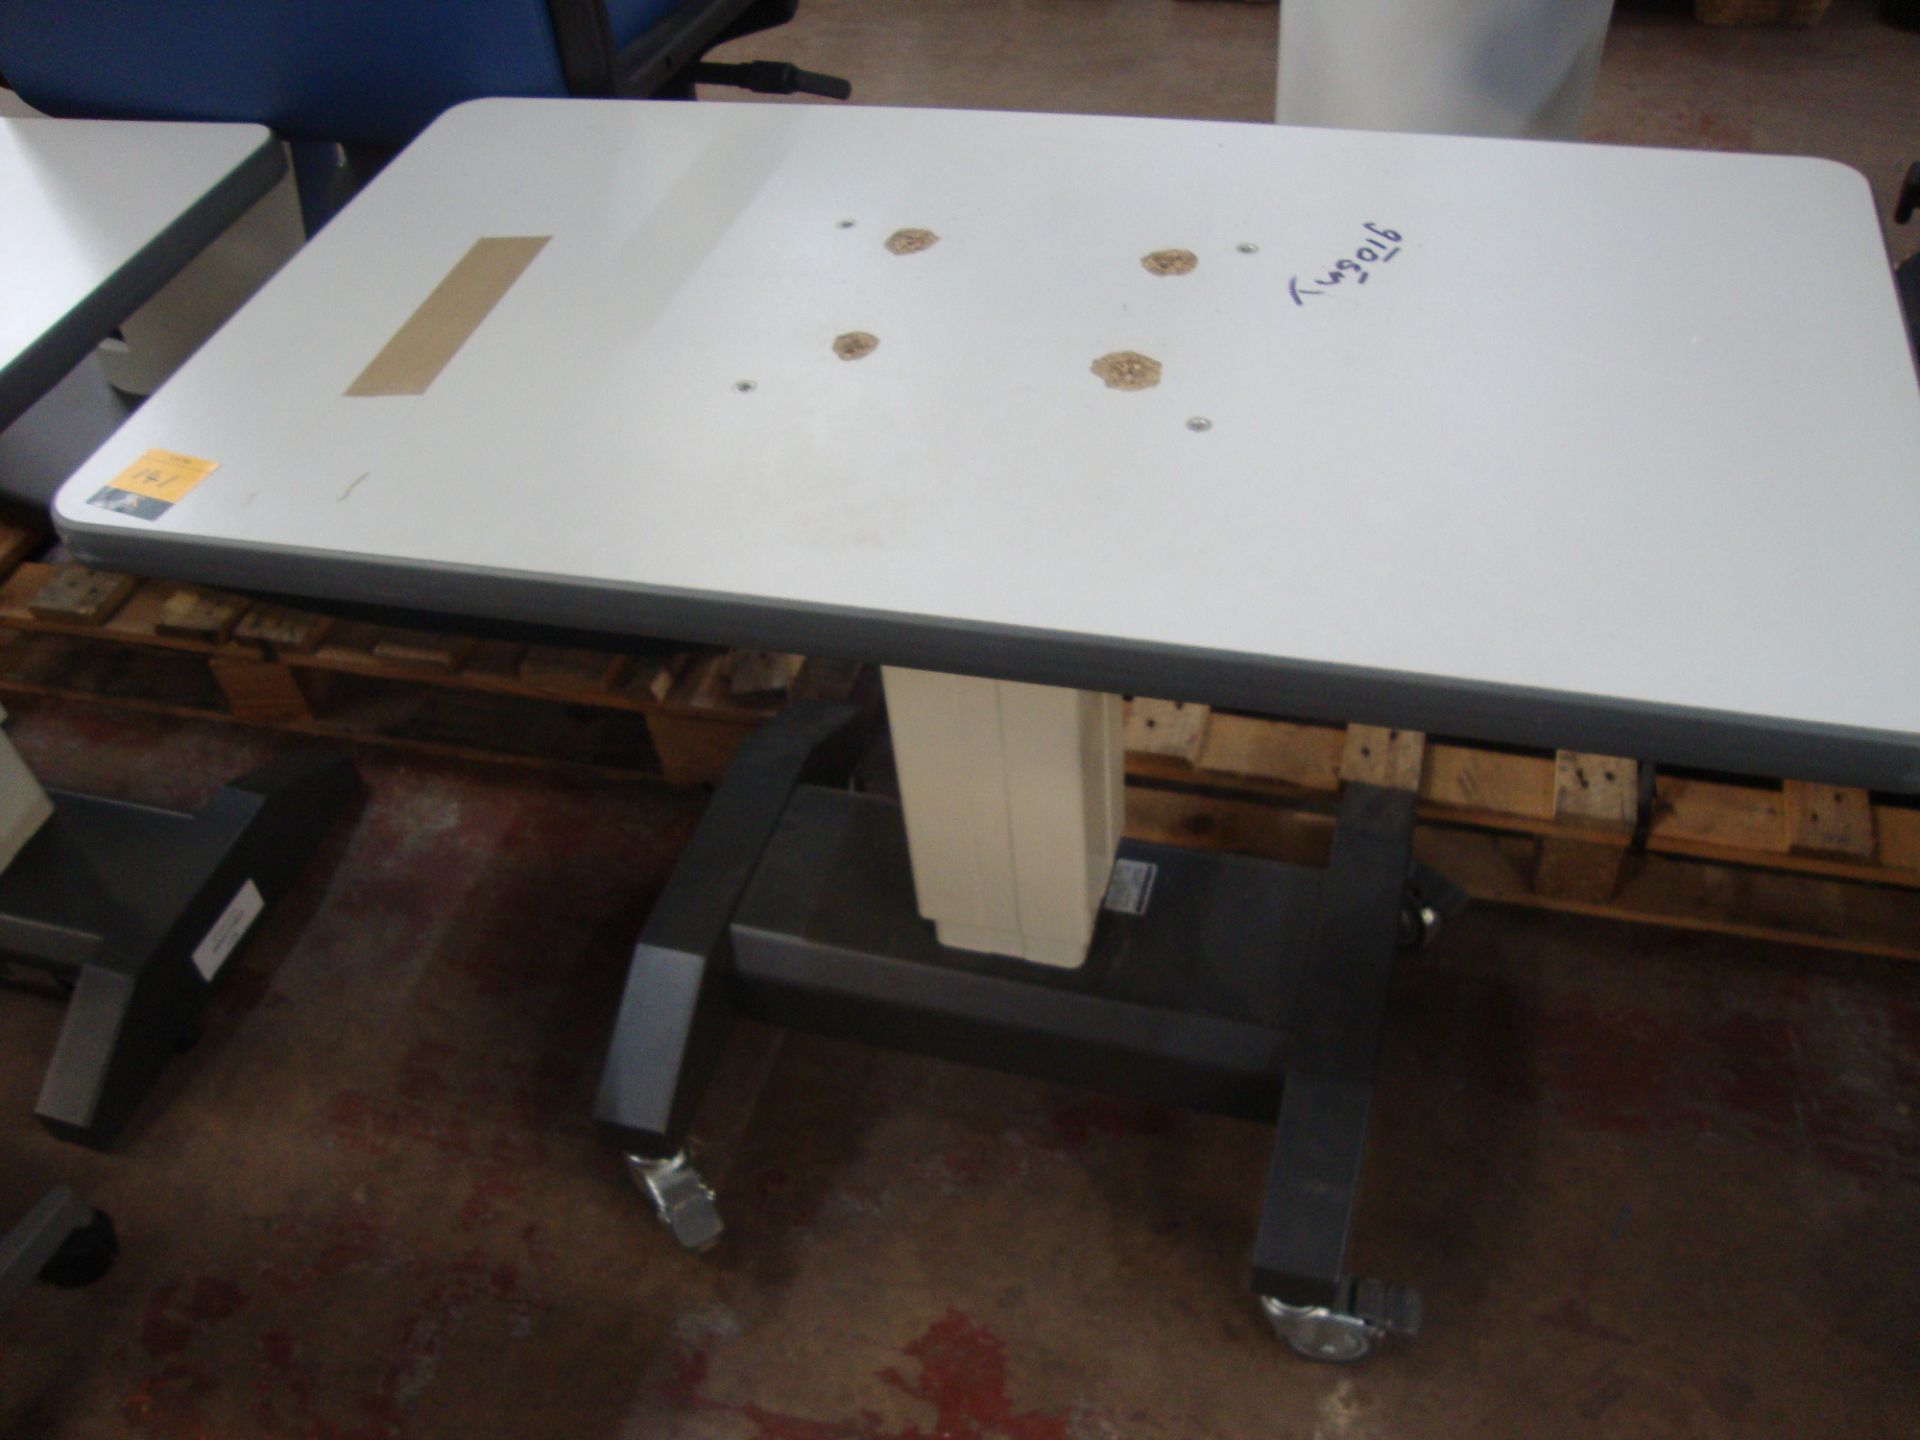 Electric motorized rising table 910mm x 490mm. NB. tabletop has pulled away from the screws that